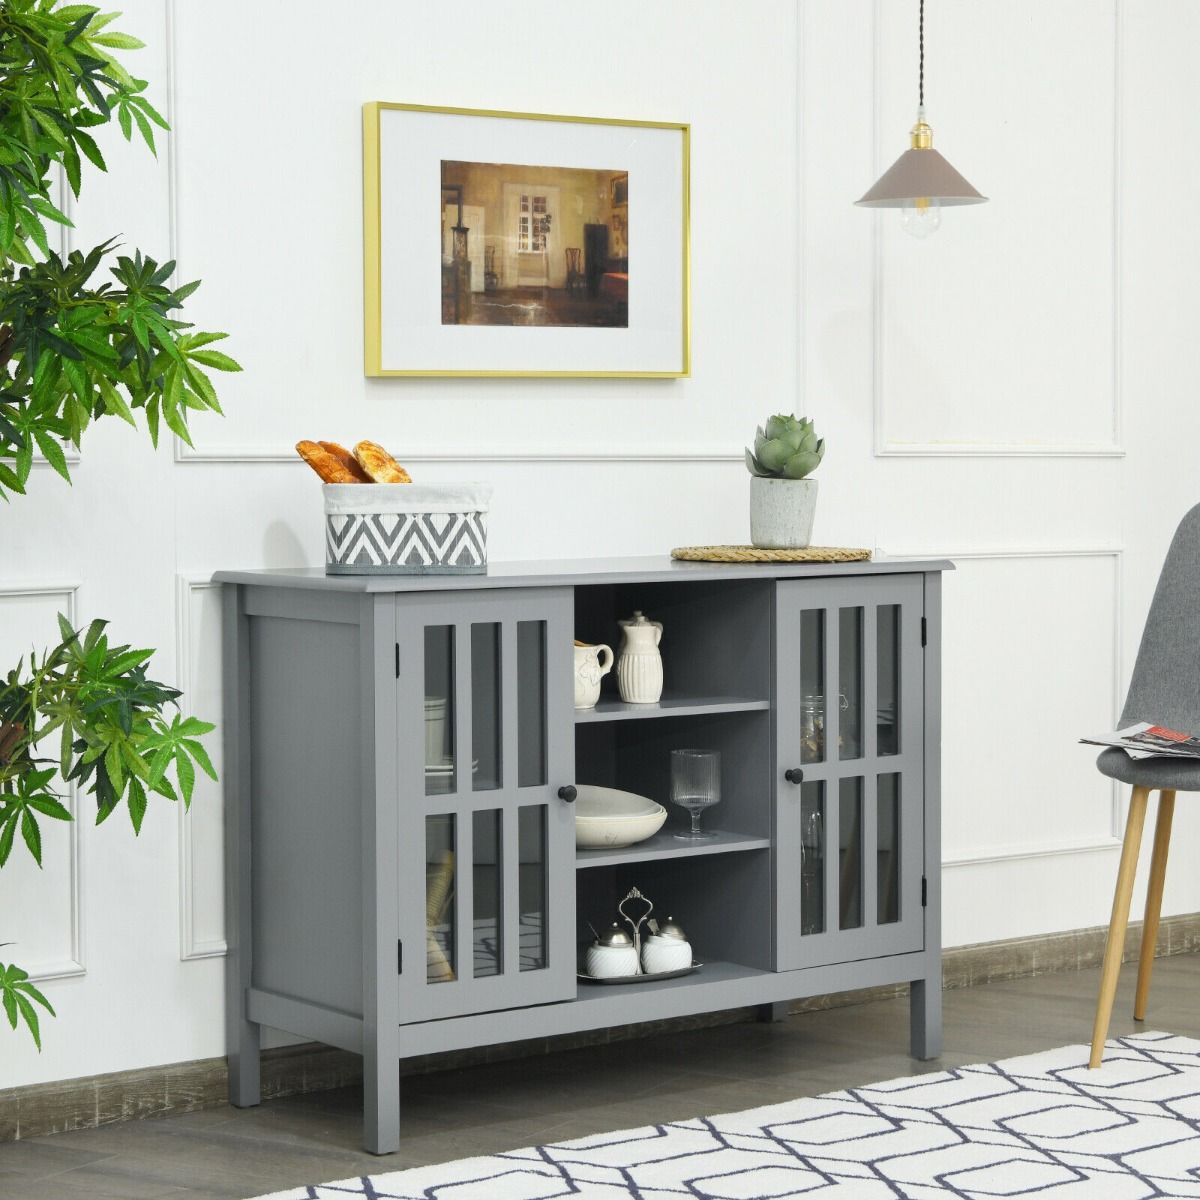 Wooden TV Stand Cabinet with Doors and Storage Shelves